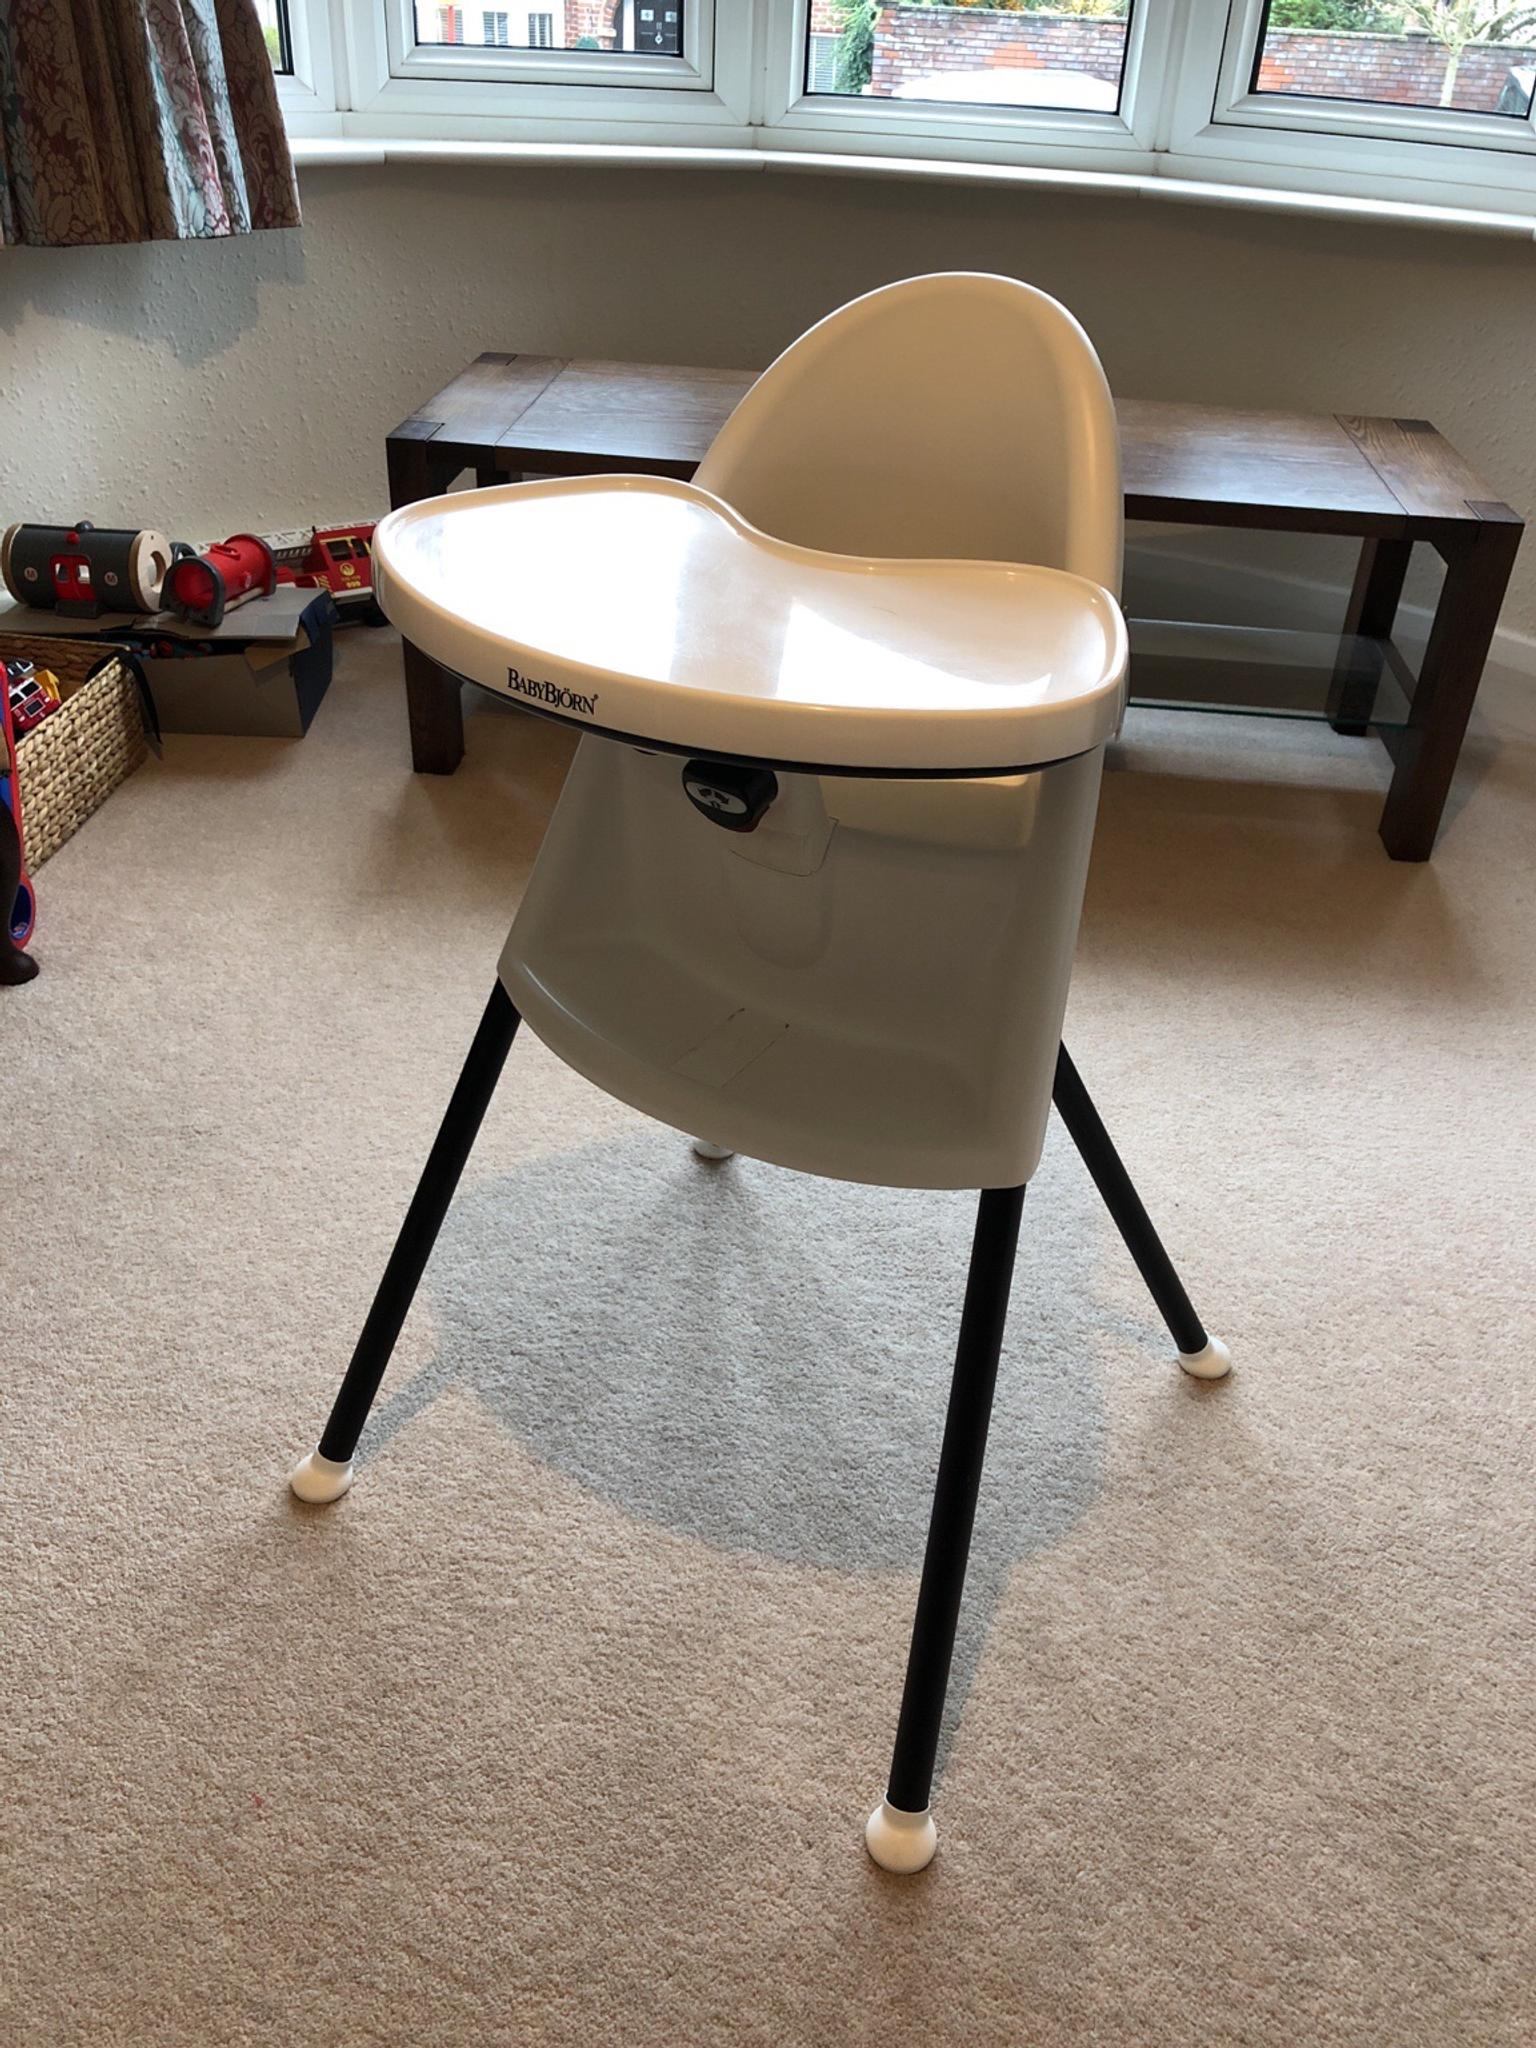 Babybjorn High Chair In E4 London For 15 00 For Sale Shpock